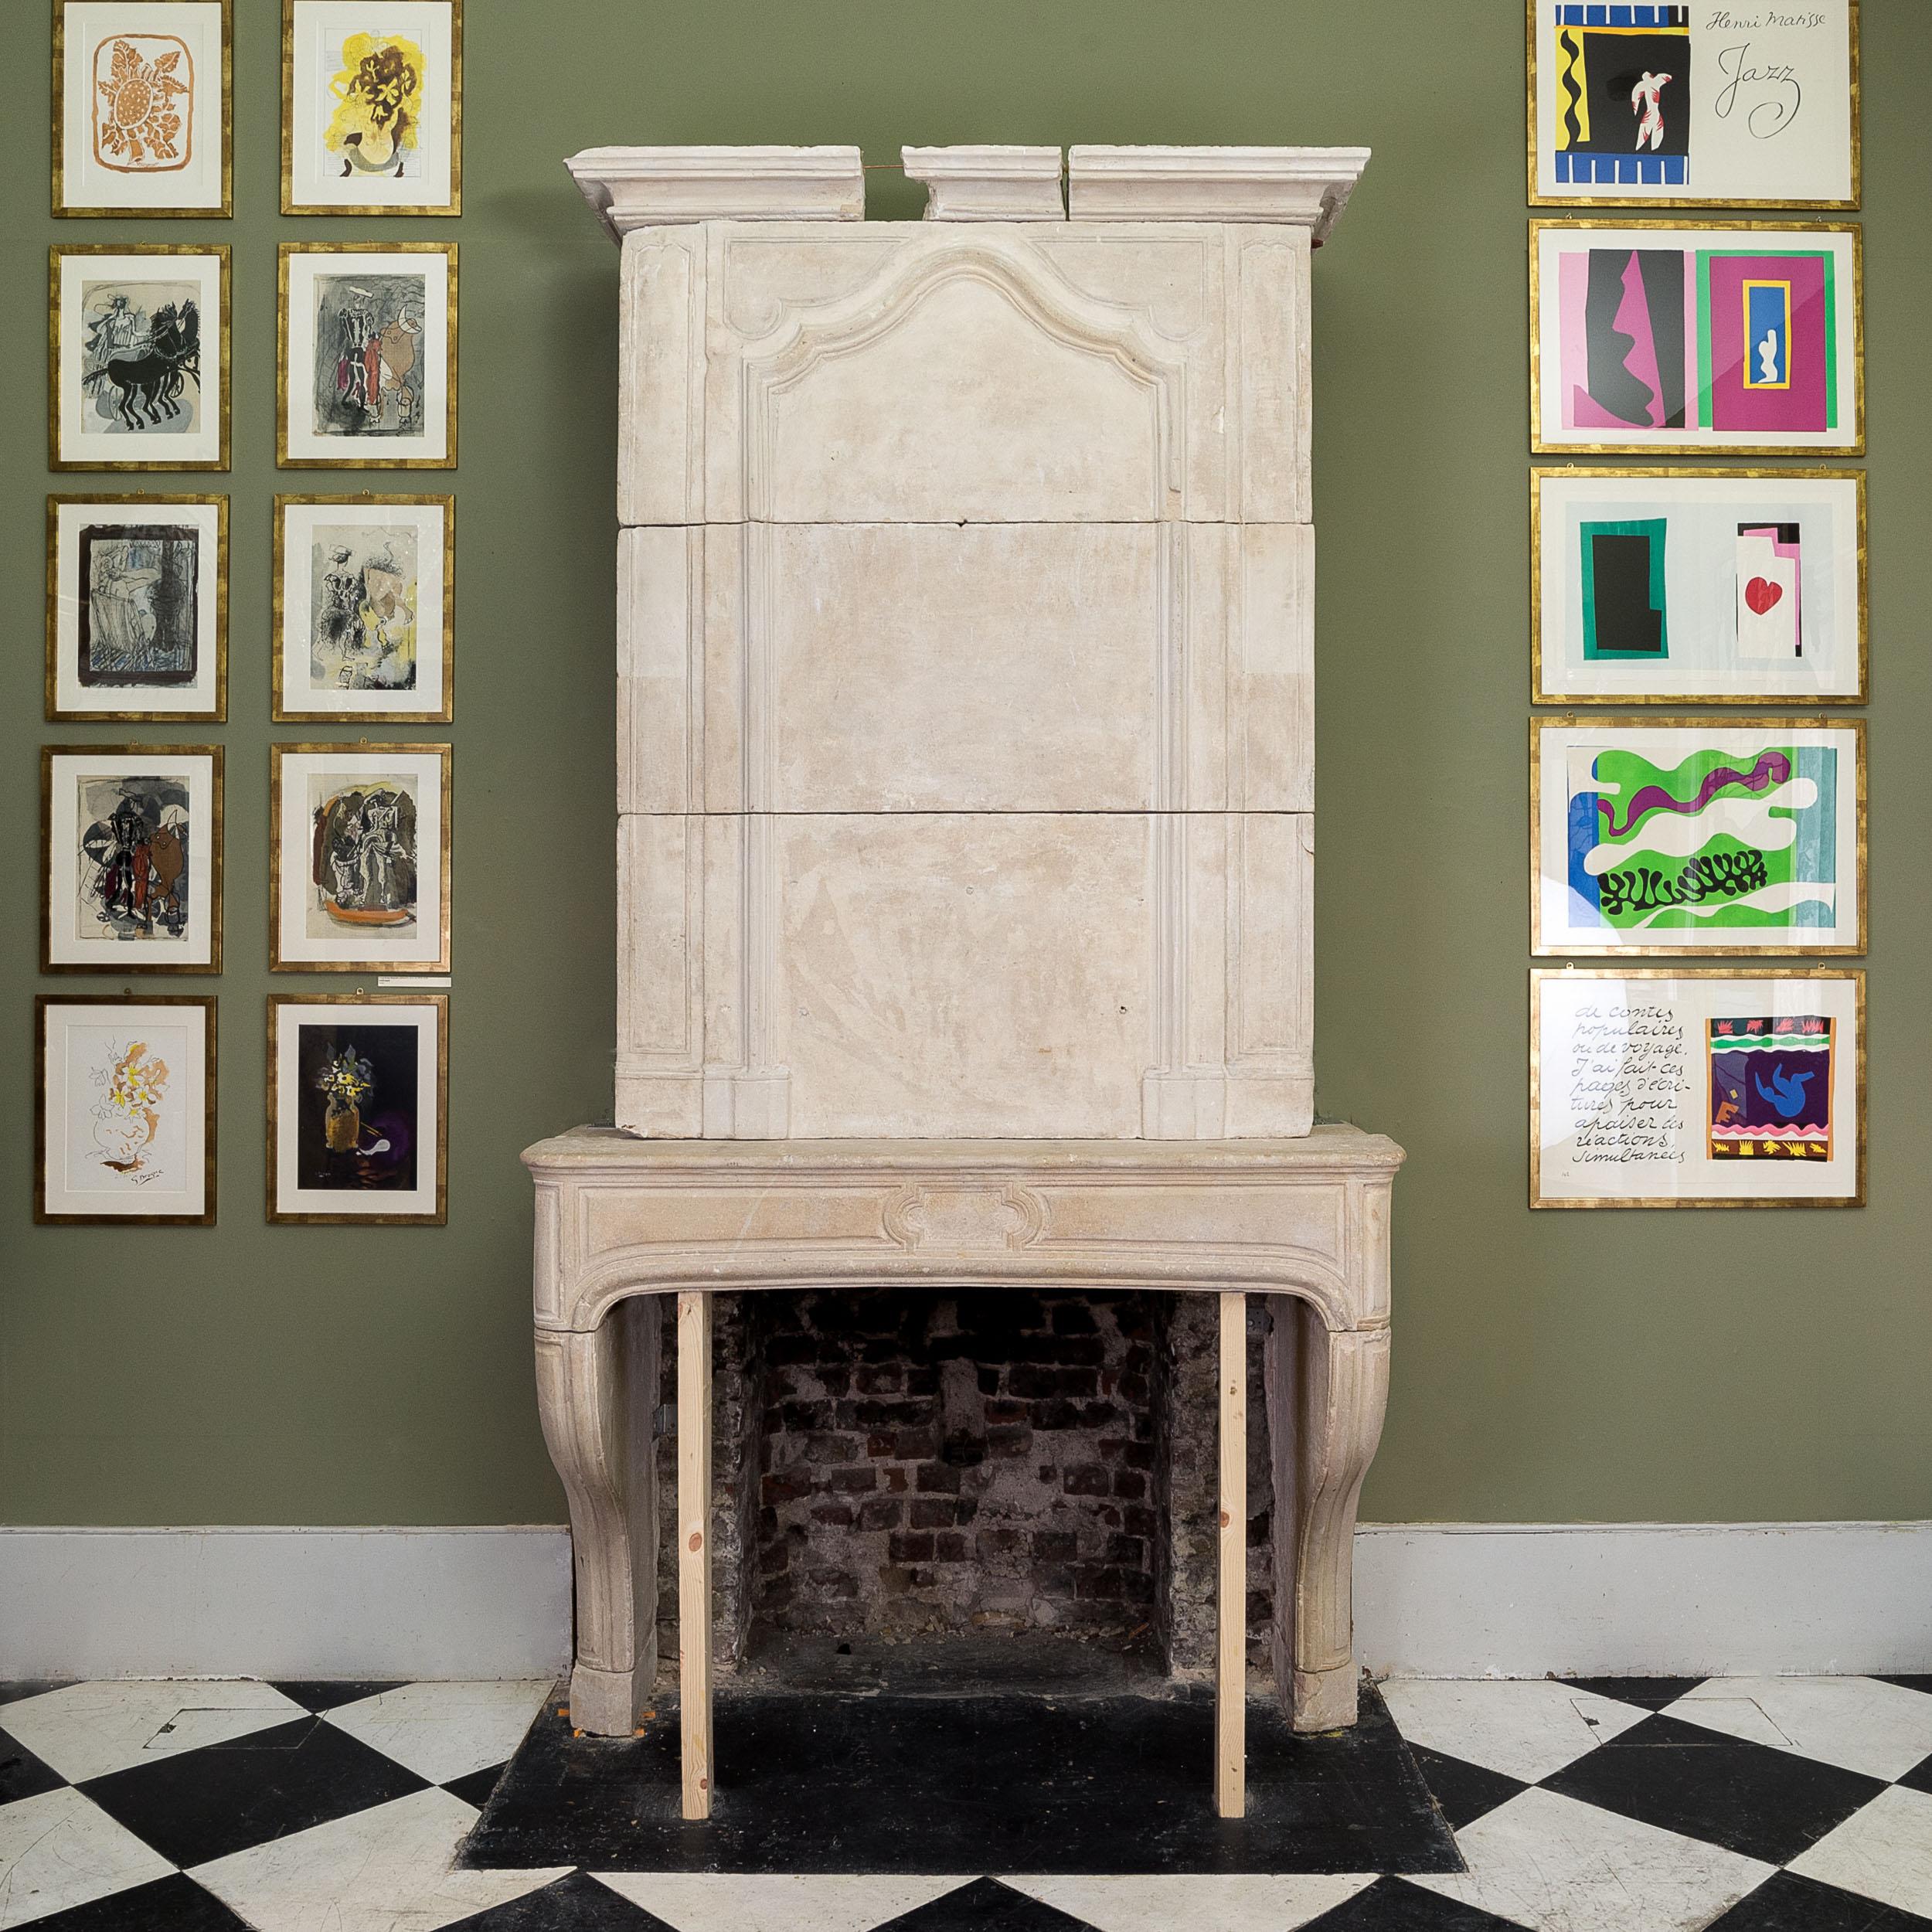 An impressive French Louis XVI limestone chimneypiece, eighteenth century, with stepped carved cornice, leading to the trumeau section centred by carved frame, flanked by long carved panels above the deep mantle decorated with further panelled